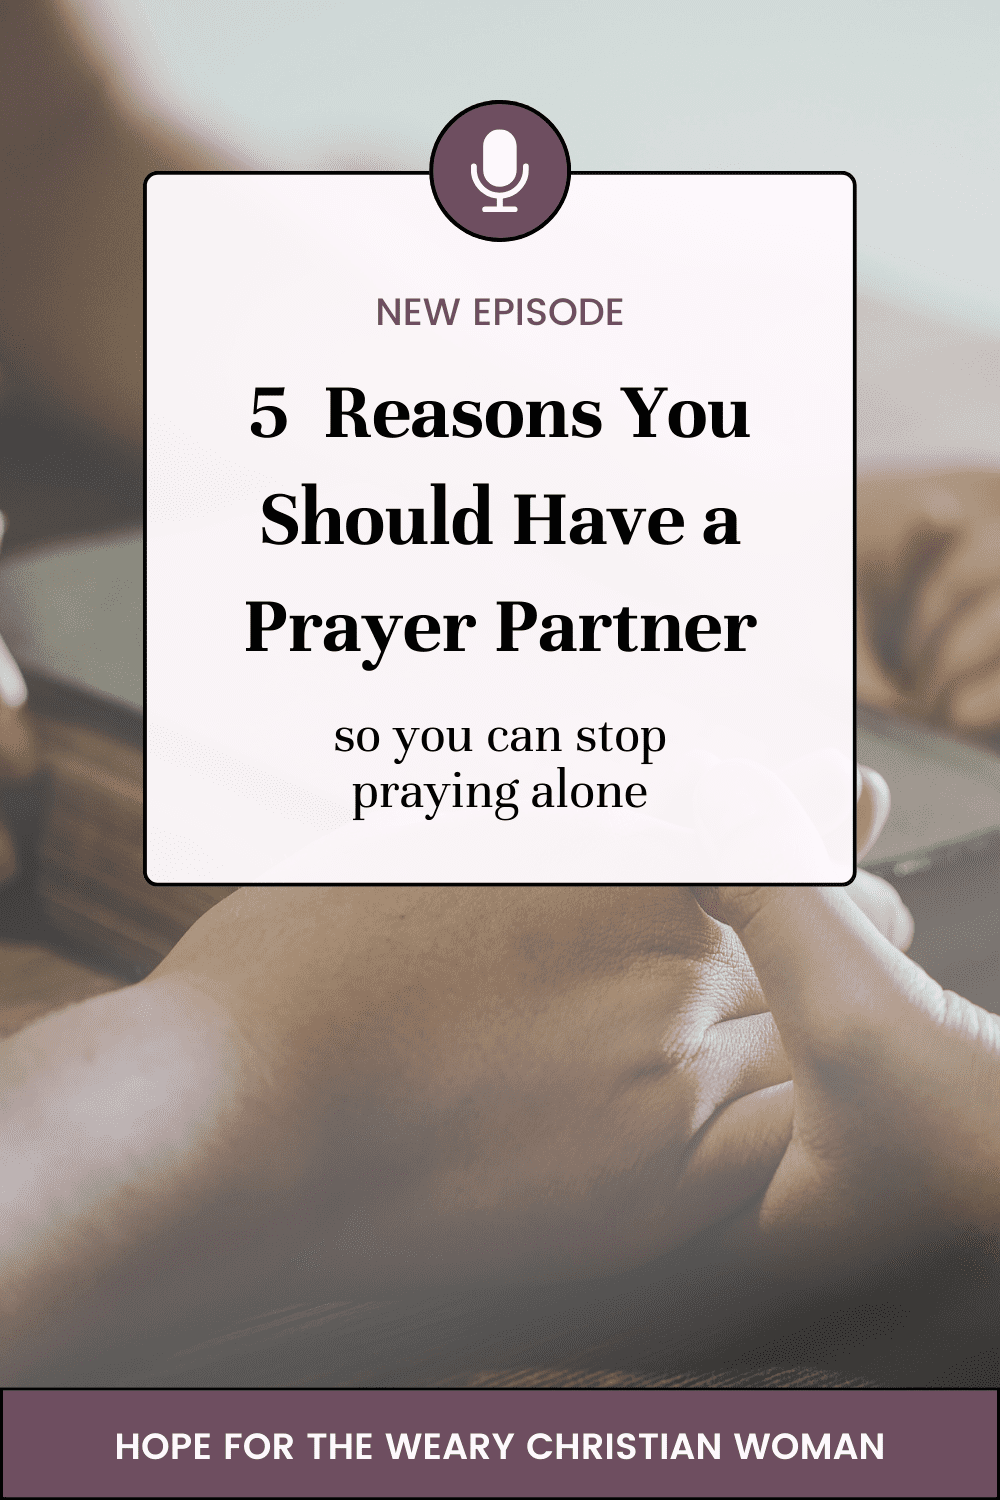 5 reasons everyone should have a prayer partner. When it comes to feeling more confident and consistent with your prayer life doing it in community can make a big difference. Come learn about the benefits of having a prayer partner. Perfect for beginners learning how to pray.